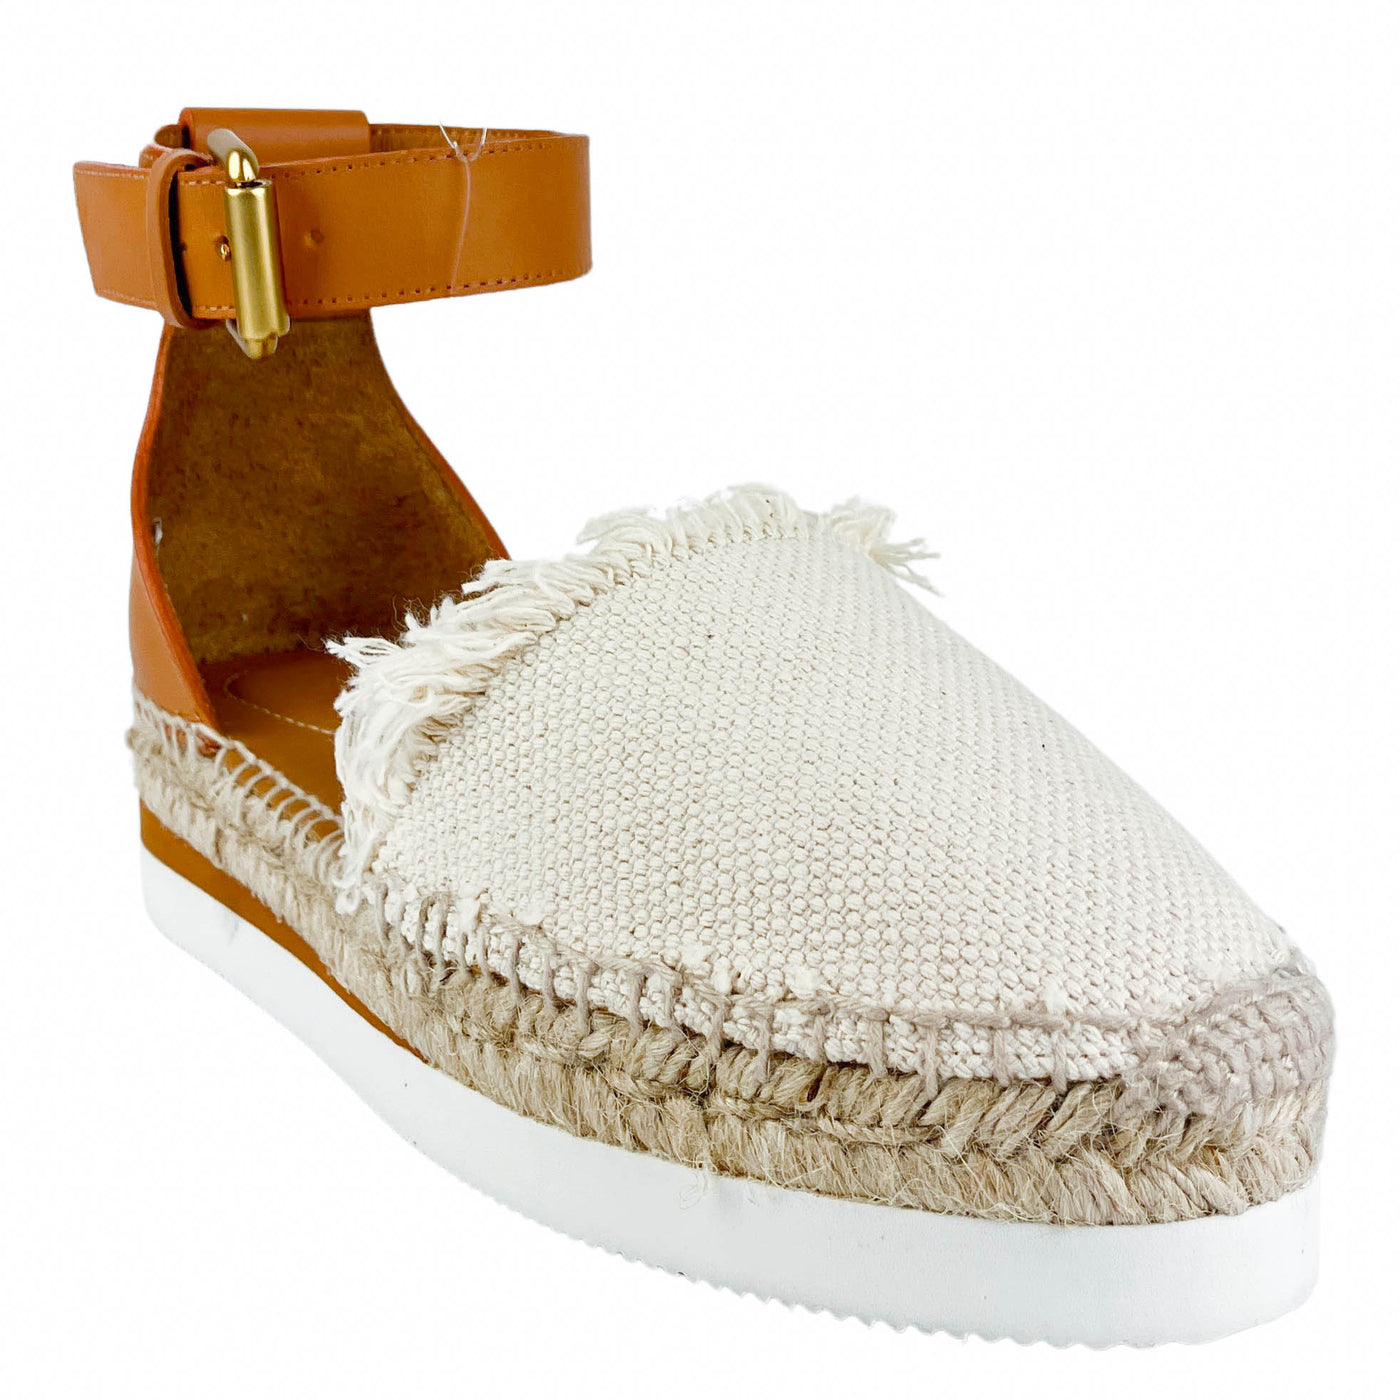 See By Chloé Glyn Canvas Flats in Natural - Discounts on See By Chloé at UAL